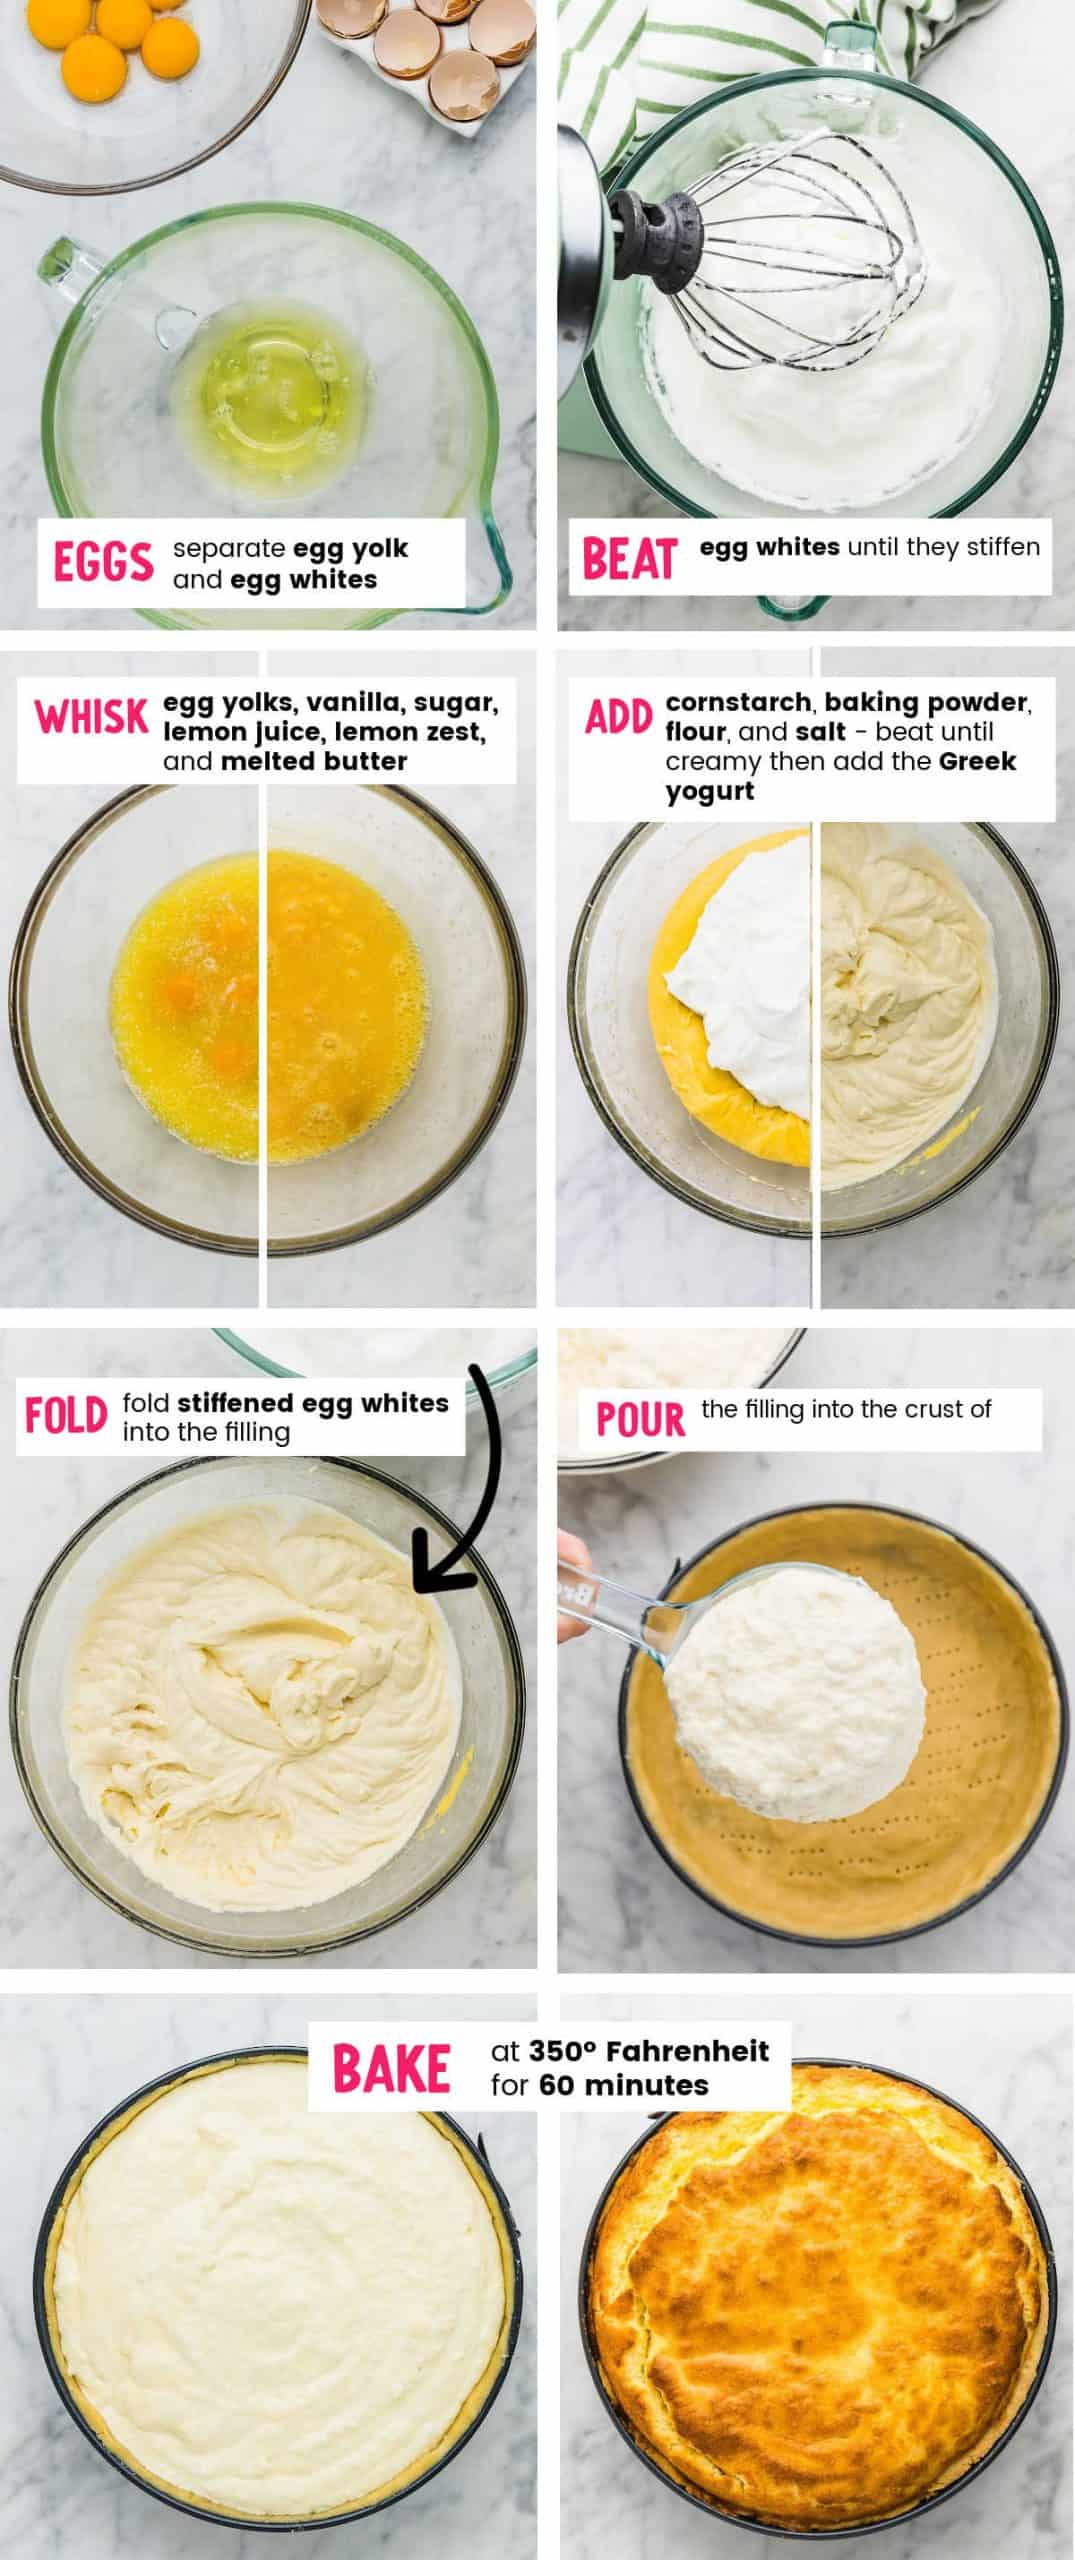 Collage of images showing step-by-step how to make the filling for the German Cheesecake.